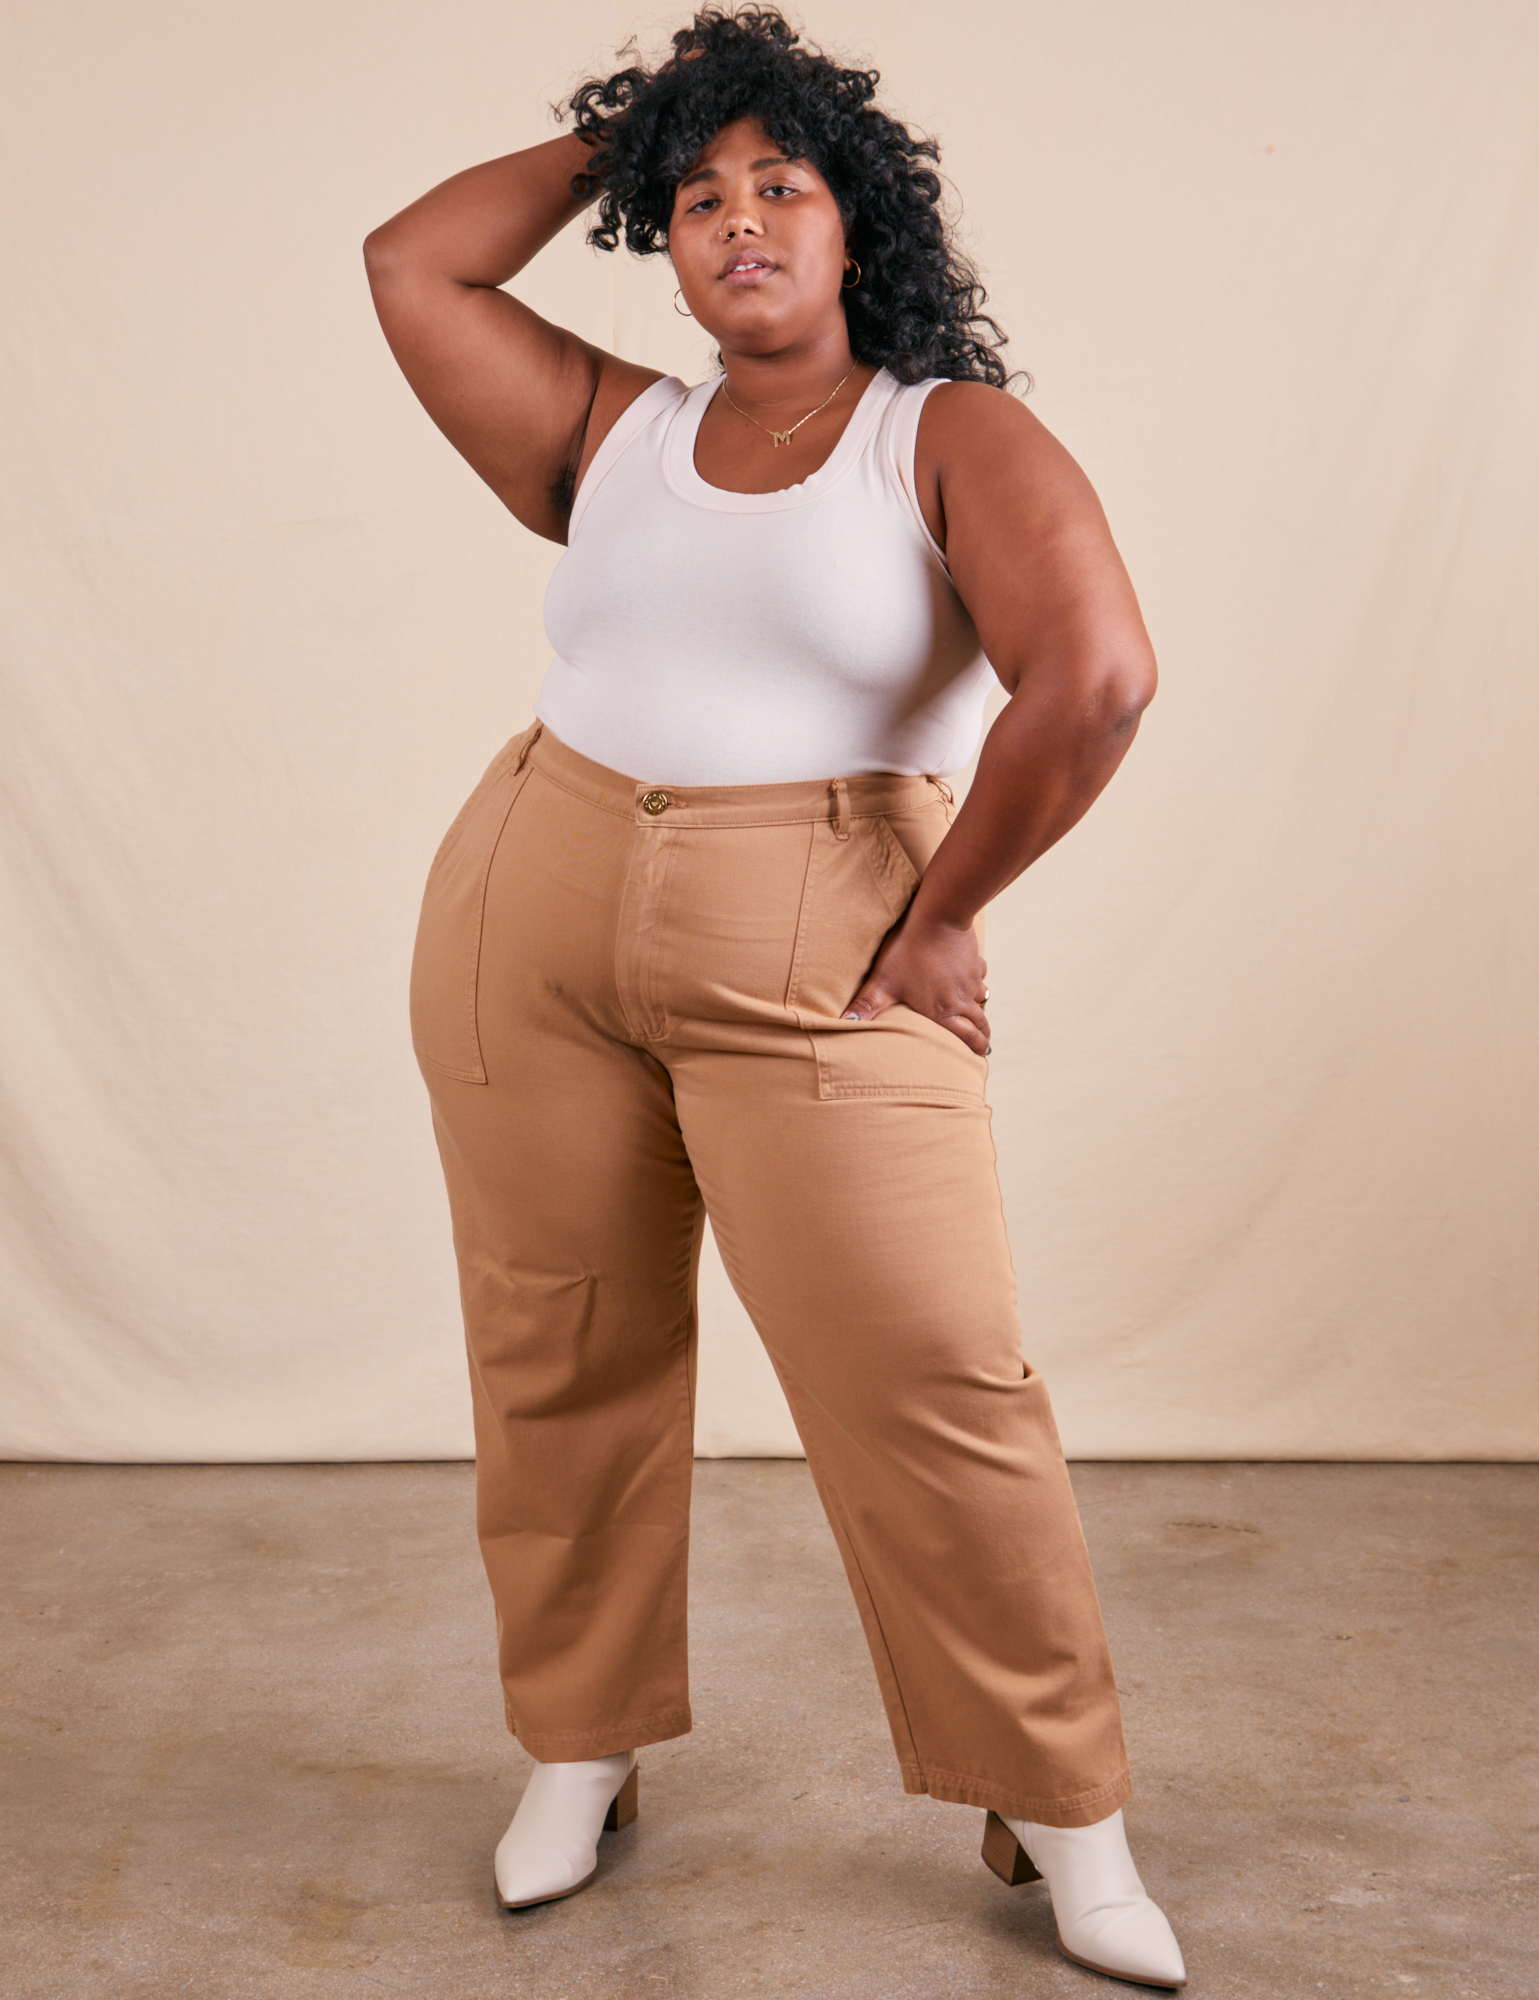 Morgan is 5&#39;5&quot; and wearing 3XL Work Pants in Tan paired with vintage off-white Tank Top